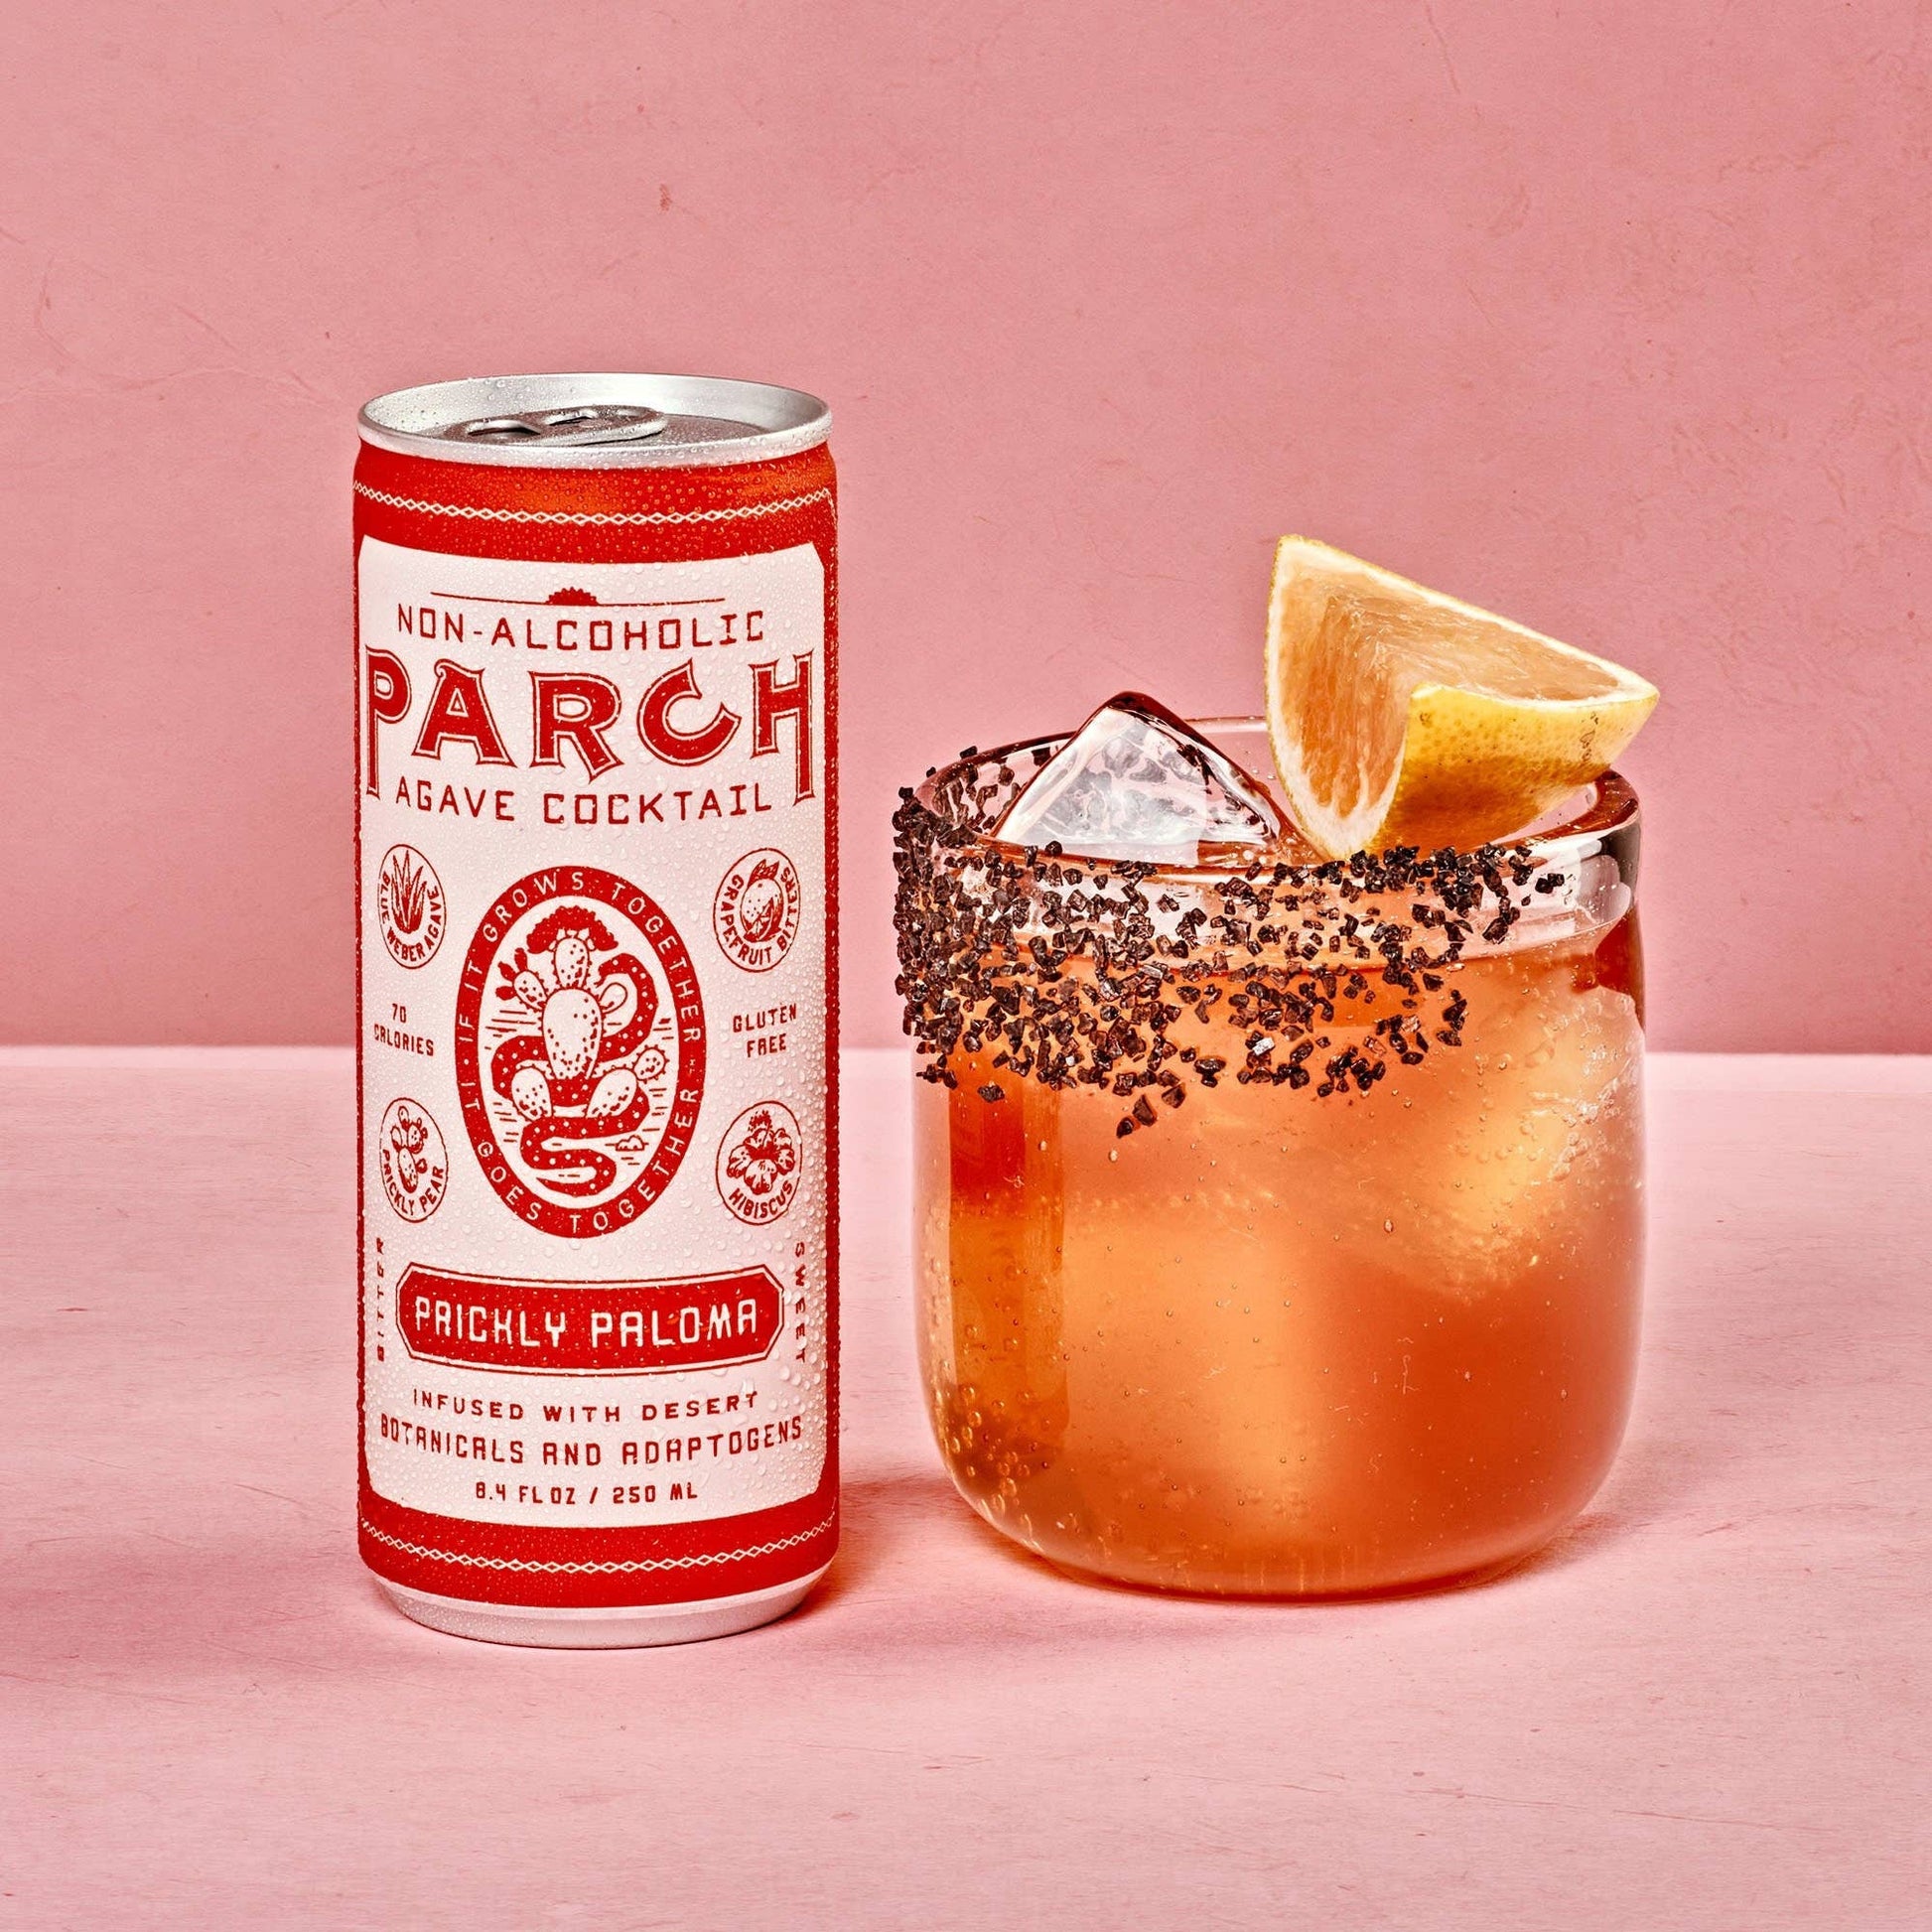 parch prickly paloma